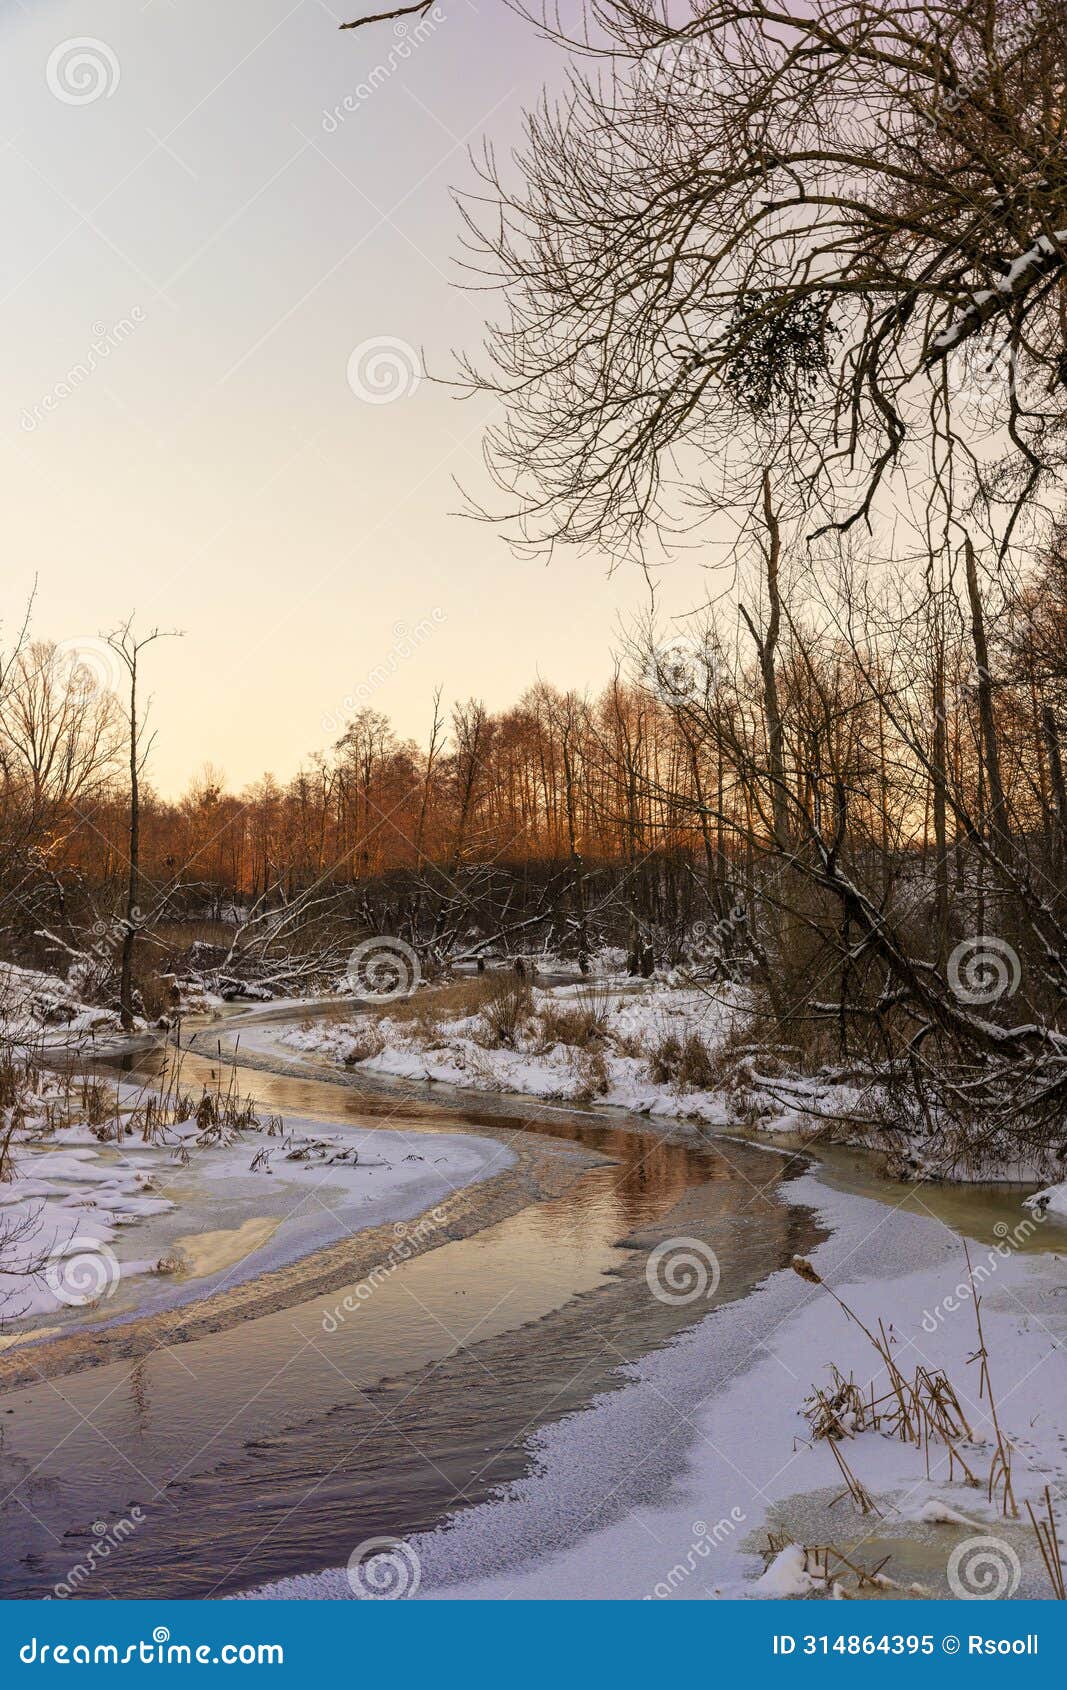 sunset on a river whose banks are covered with ice